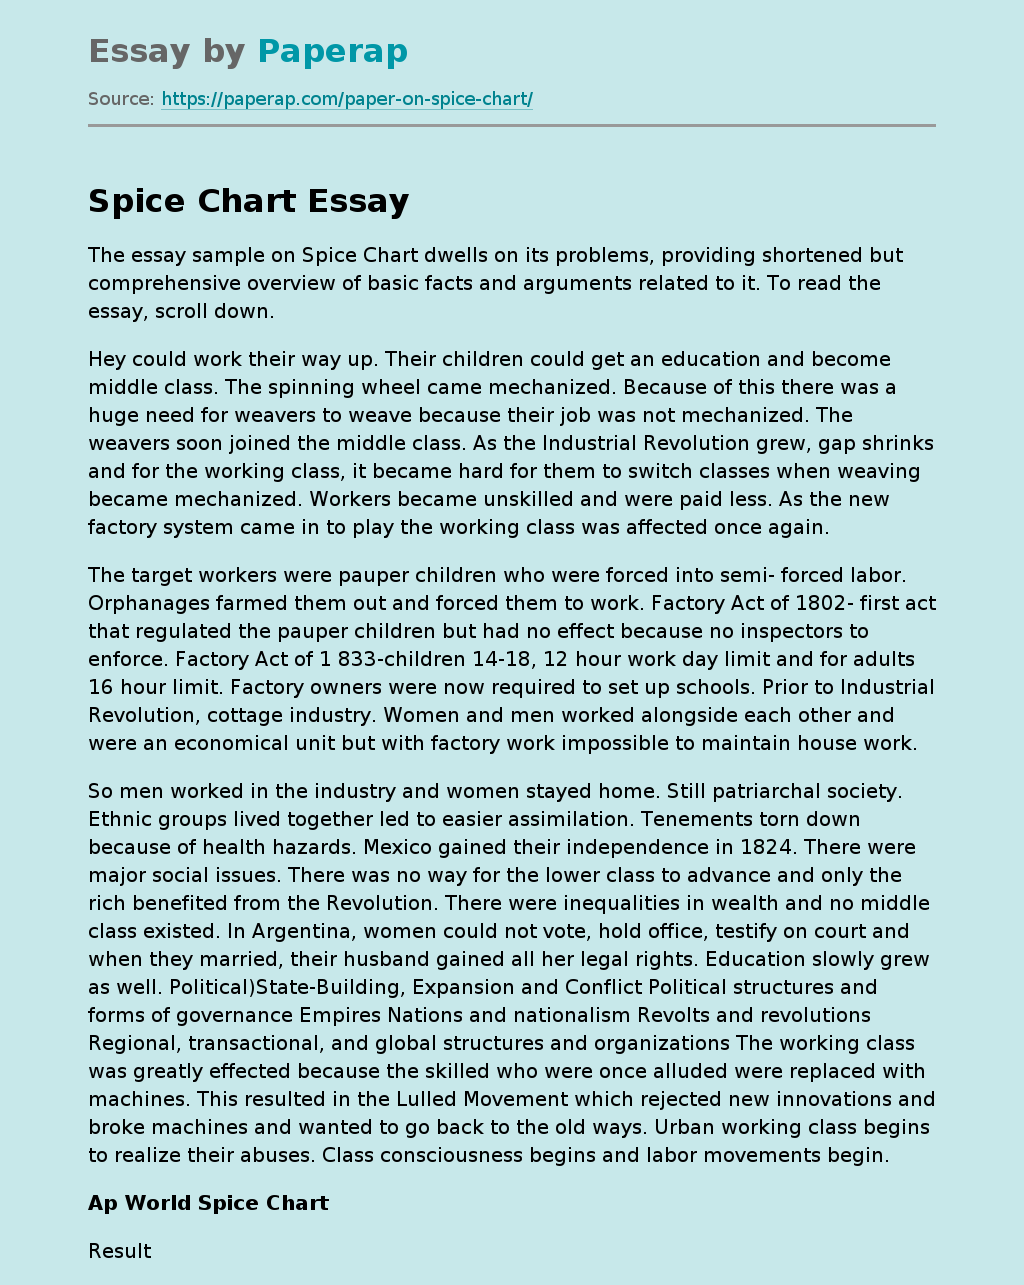 Spice Chart Problems Overview